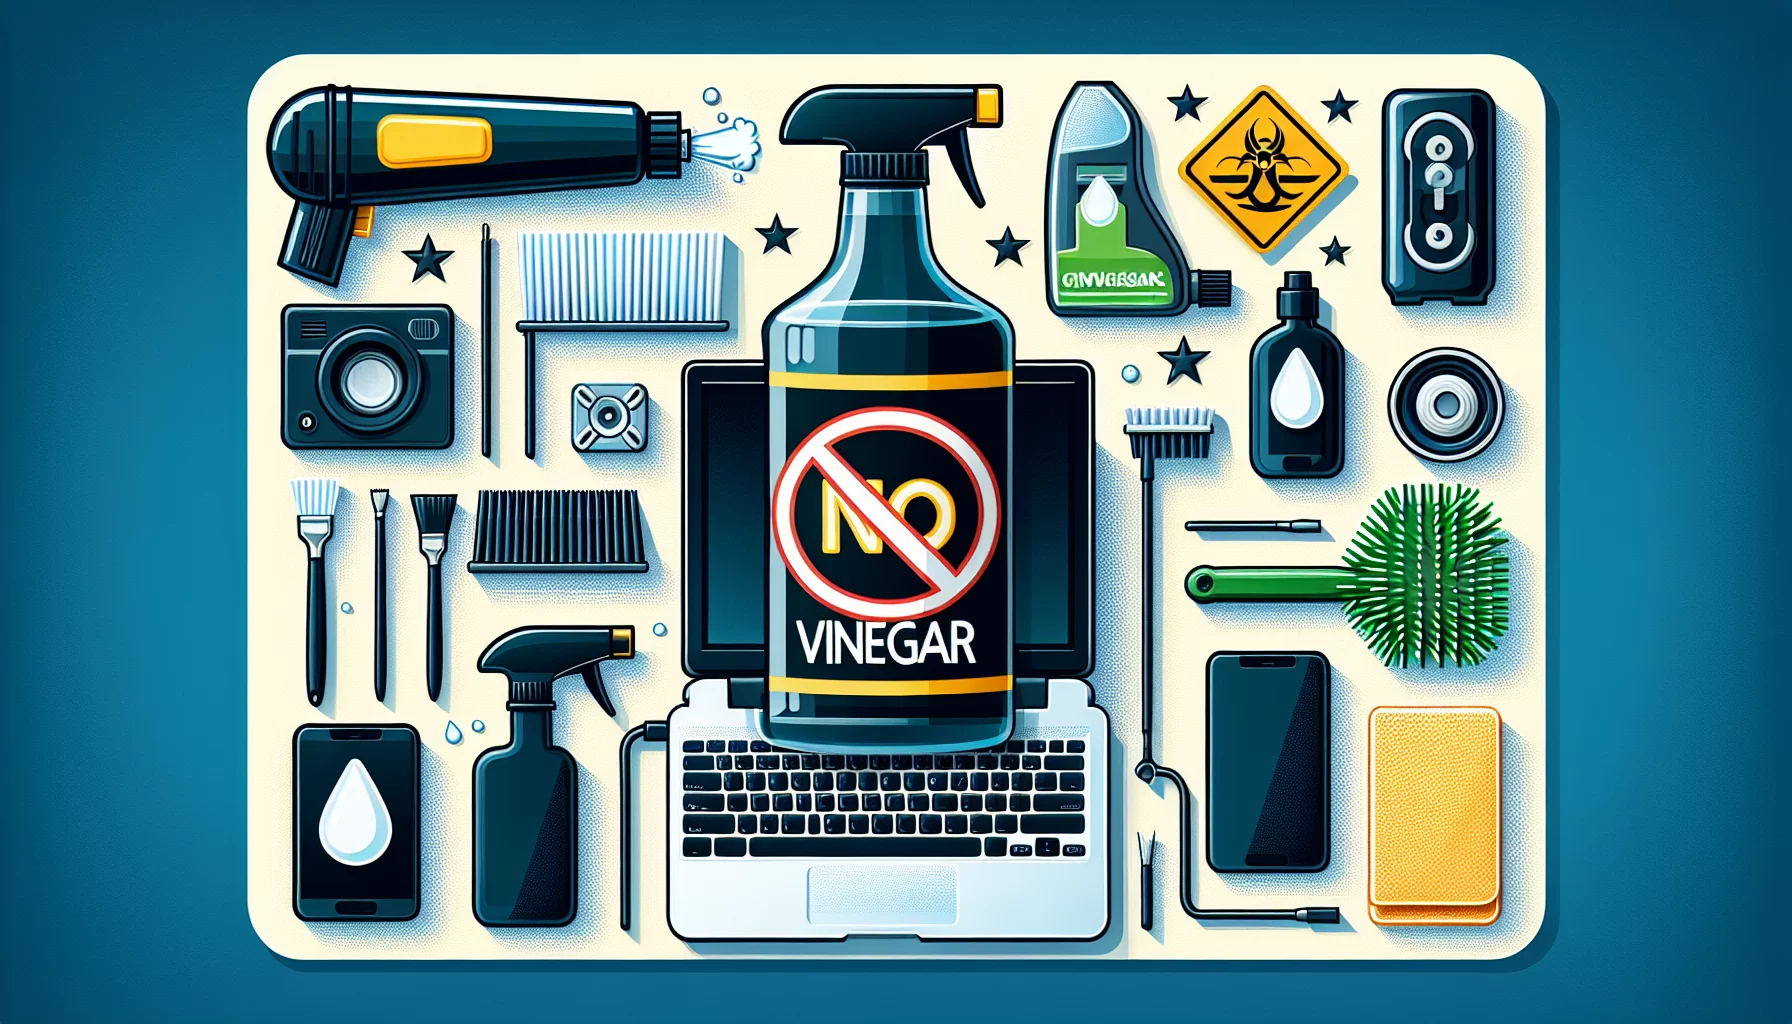 Stop using vinegar for cleaning electronics - discover safe options